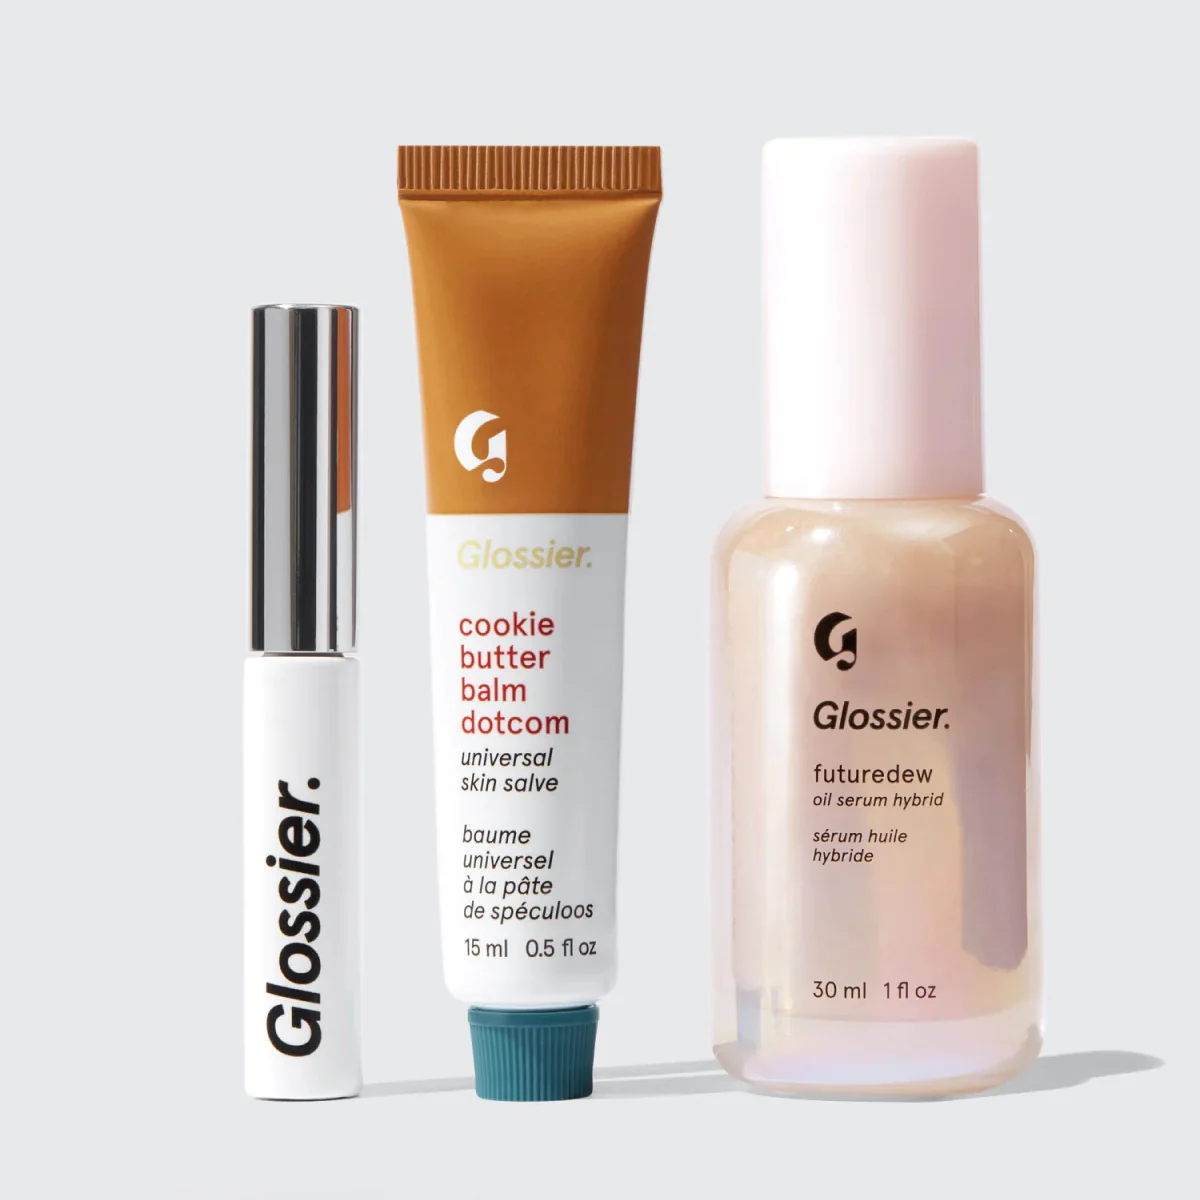 Three glossier products lined up against a plain background